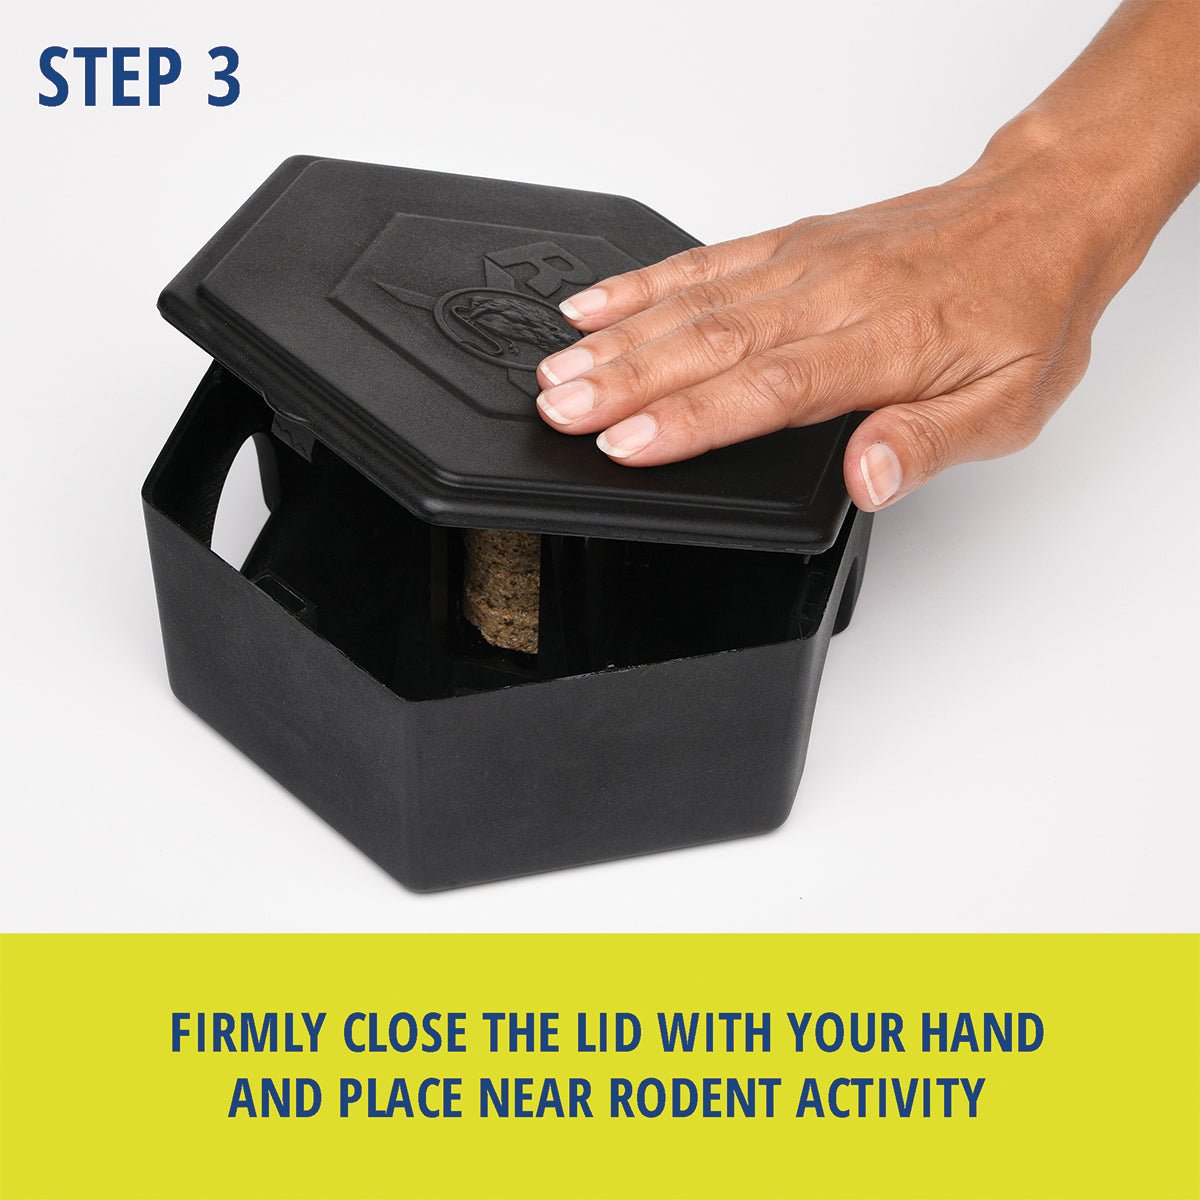 RatX® Small Bait Box. Step 3: Firmly close the lid with your hand and place near rodent activity